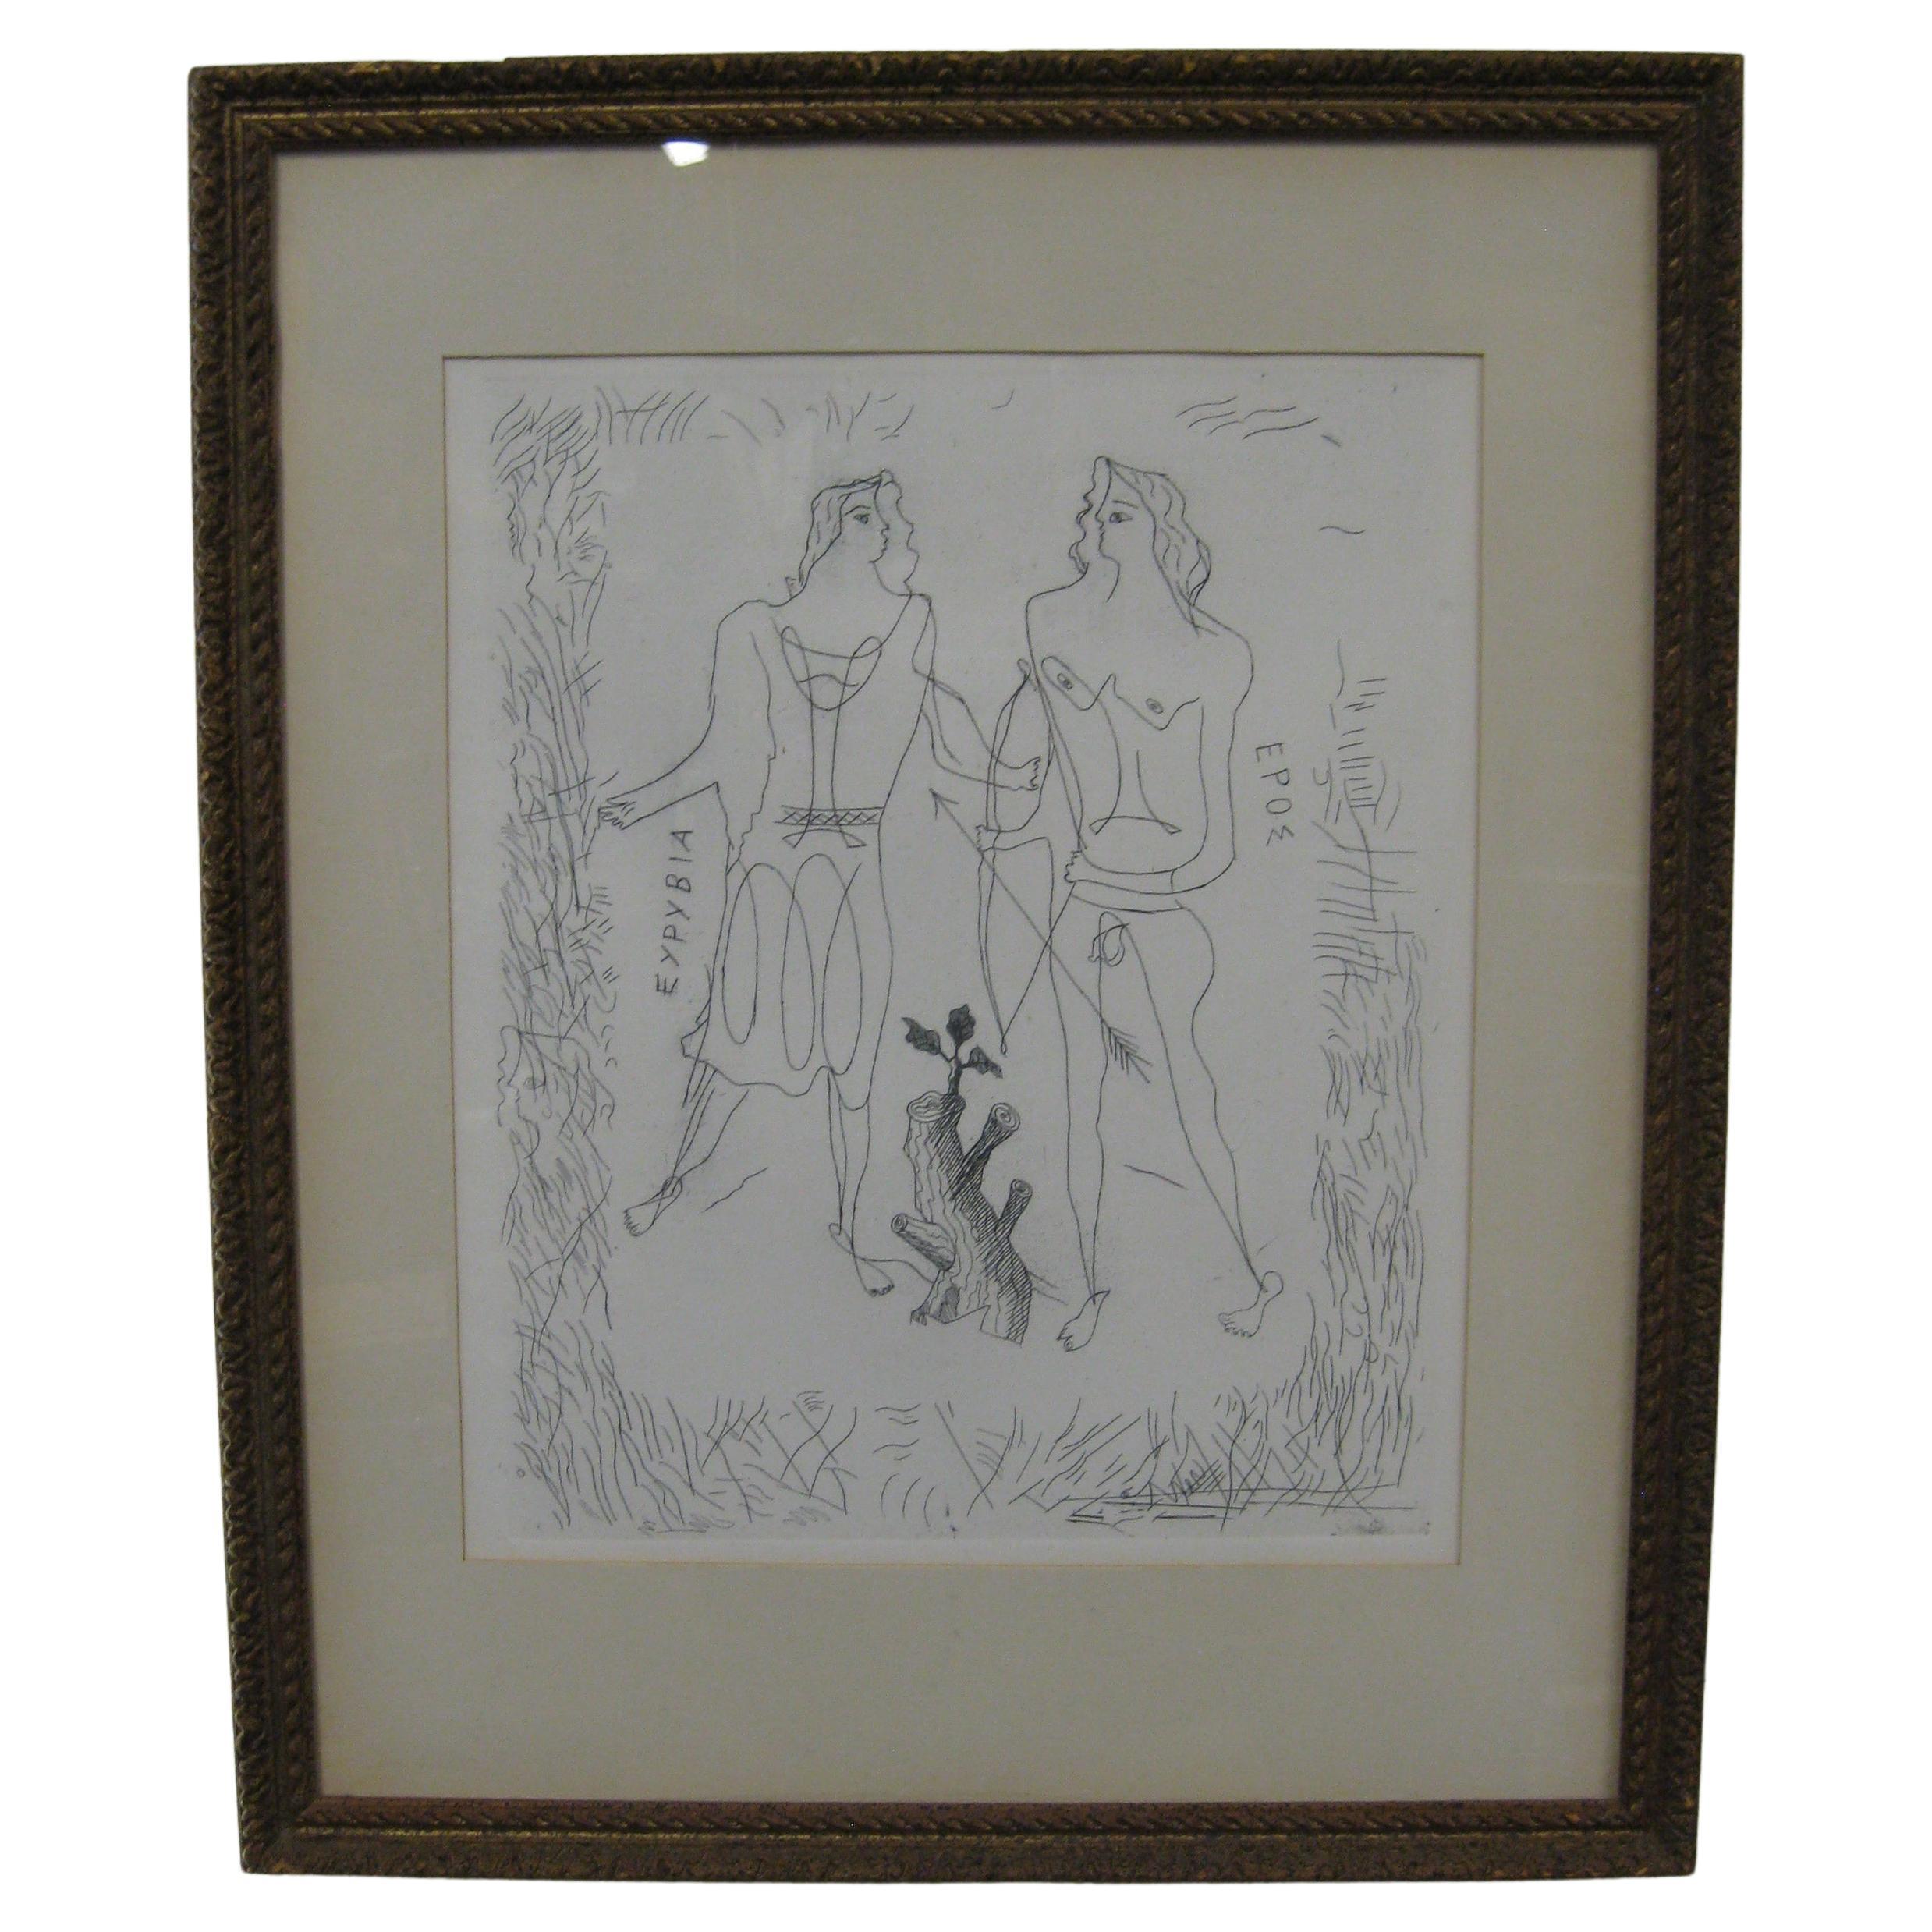 1932, Georges Braque "Eros and Eurybia" Original Etching Framed French Artist